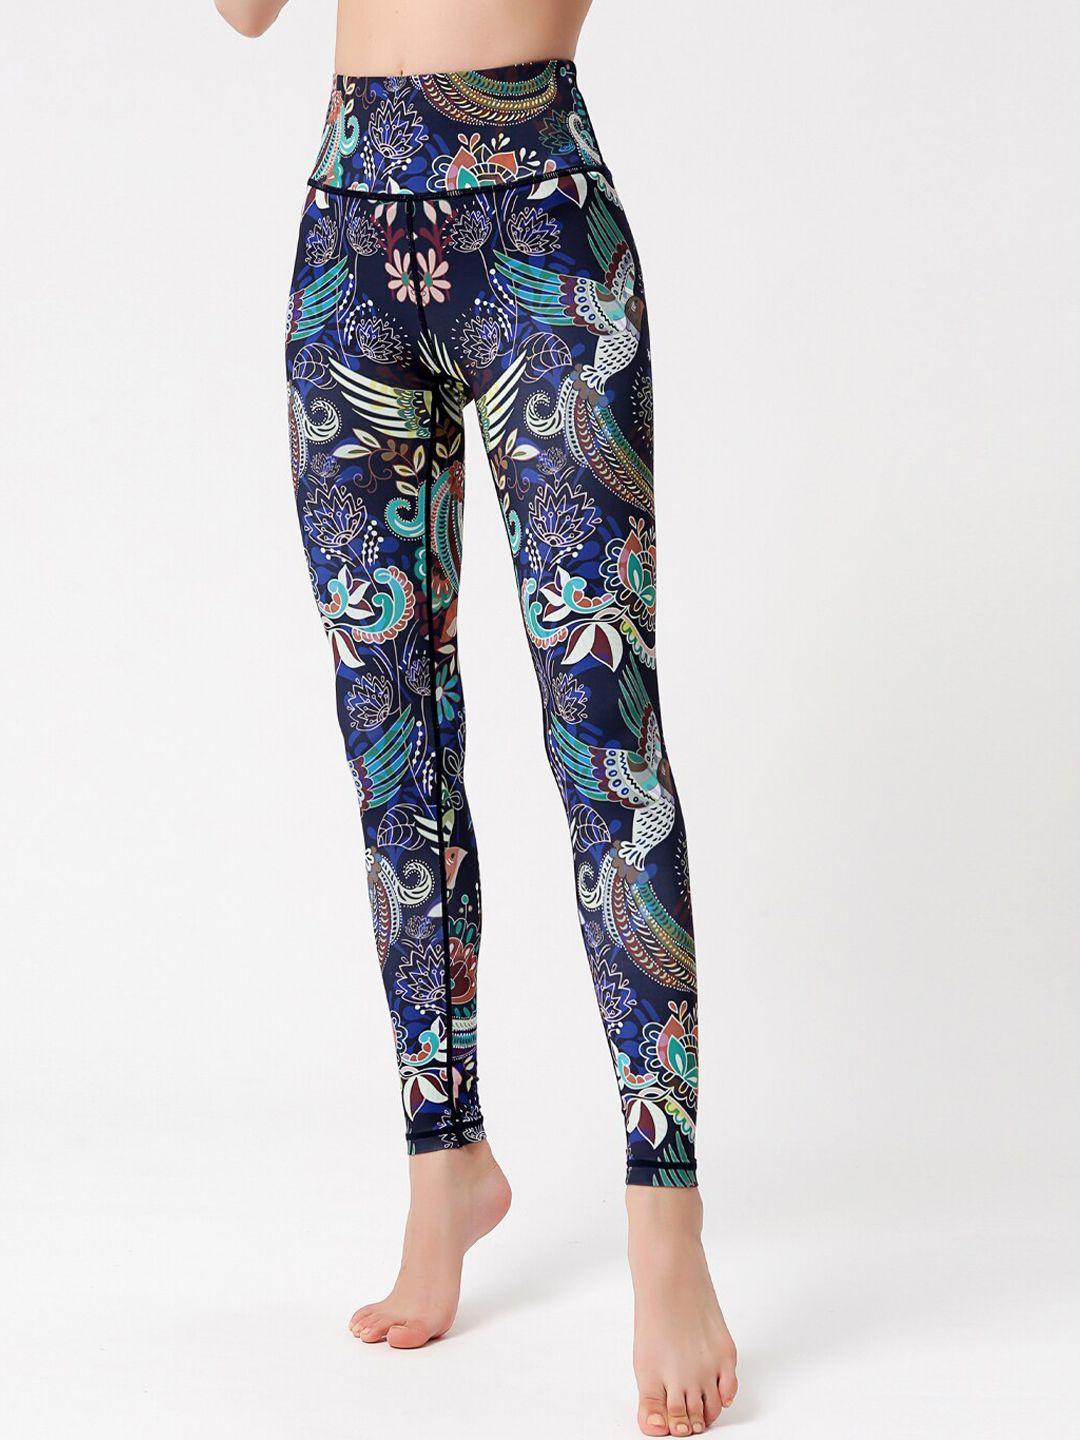 jc collection women ethnic motifs printed training or gym tights